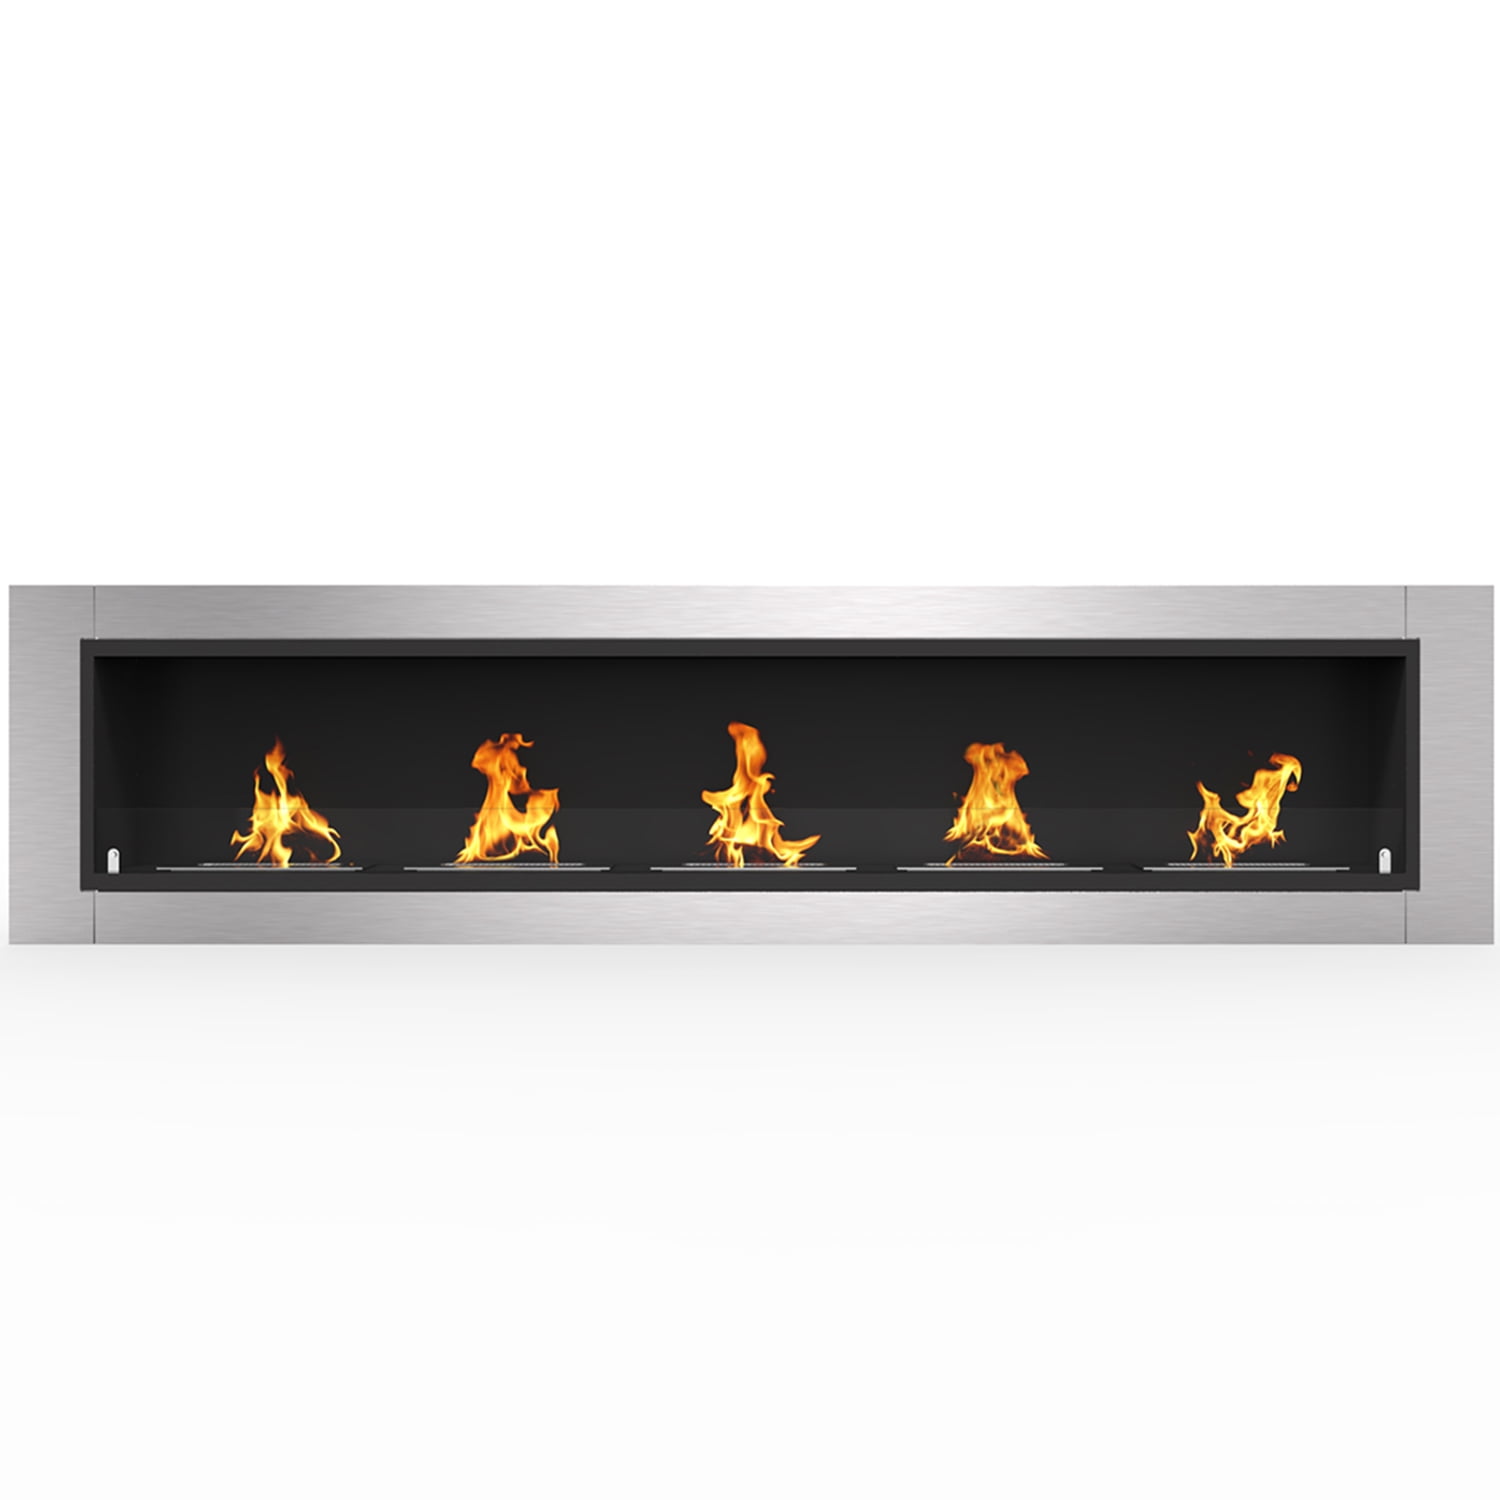 Regal Flame Cambridge 71" Ventless Built In Wall Recessed Bio Ethanol Wall Mounted Fireplace Similar Electric Fireplaces, Gas Lo